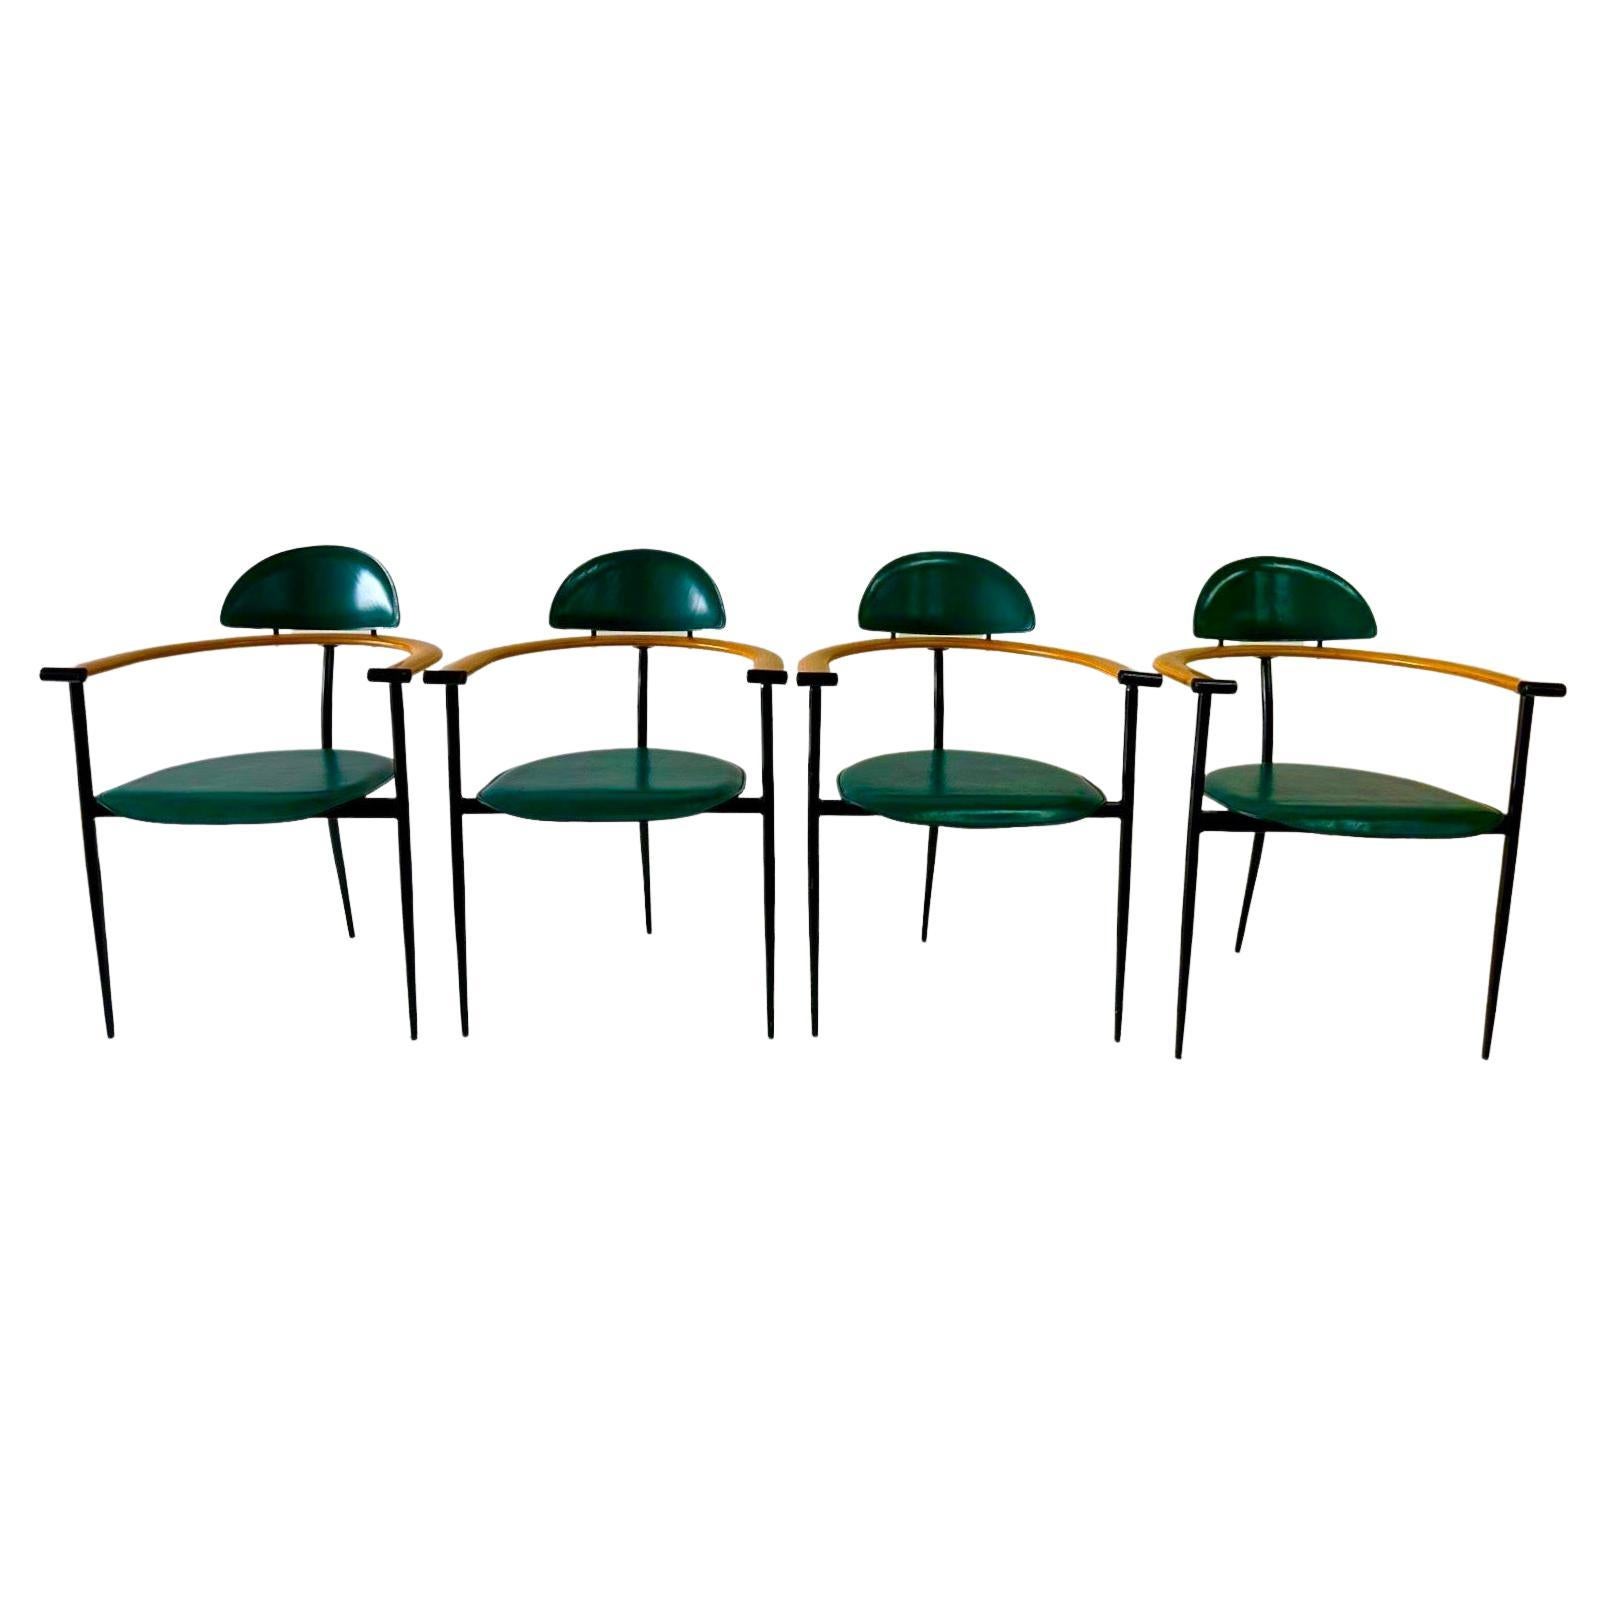 Set of Four Green Stitched Leather Stiletto Chairs by Arrben ITALY For Sale